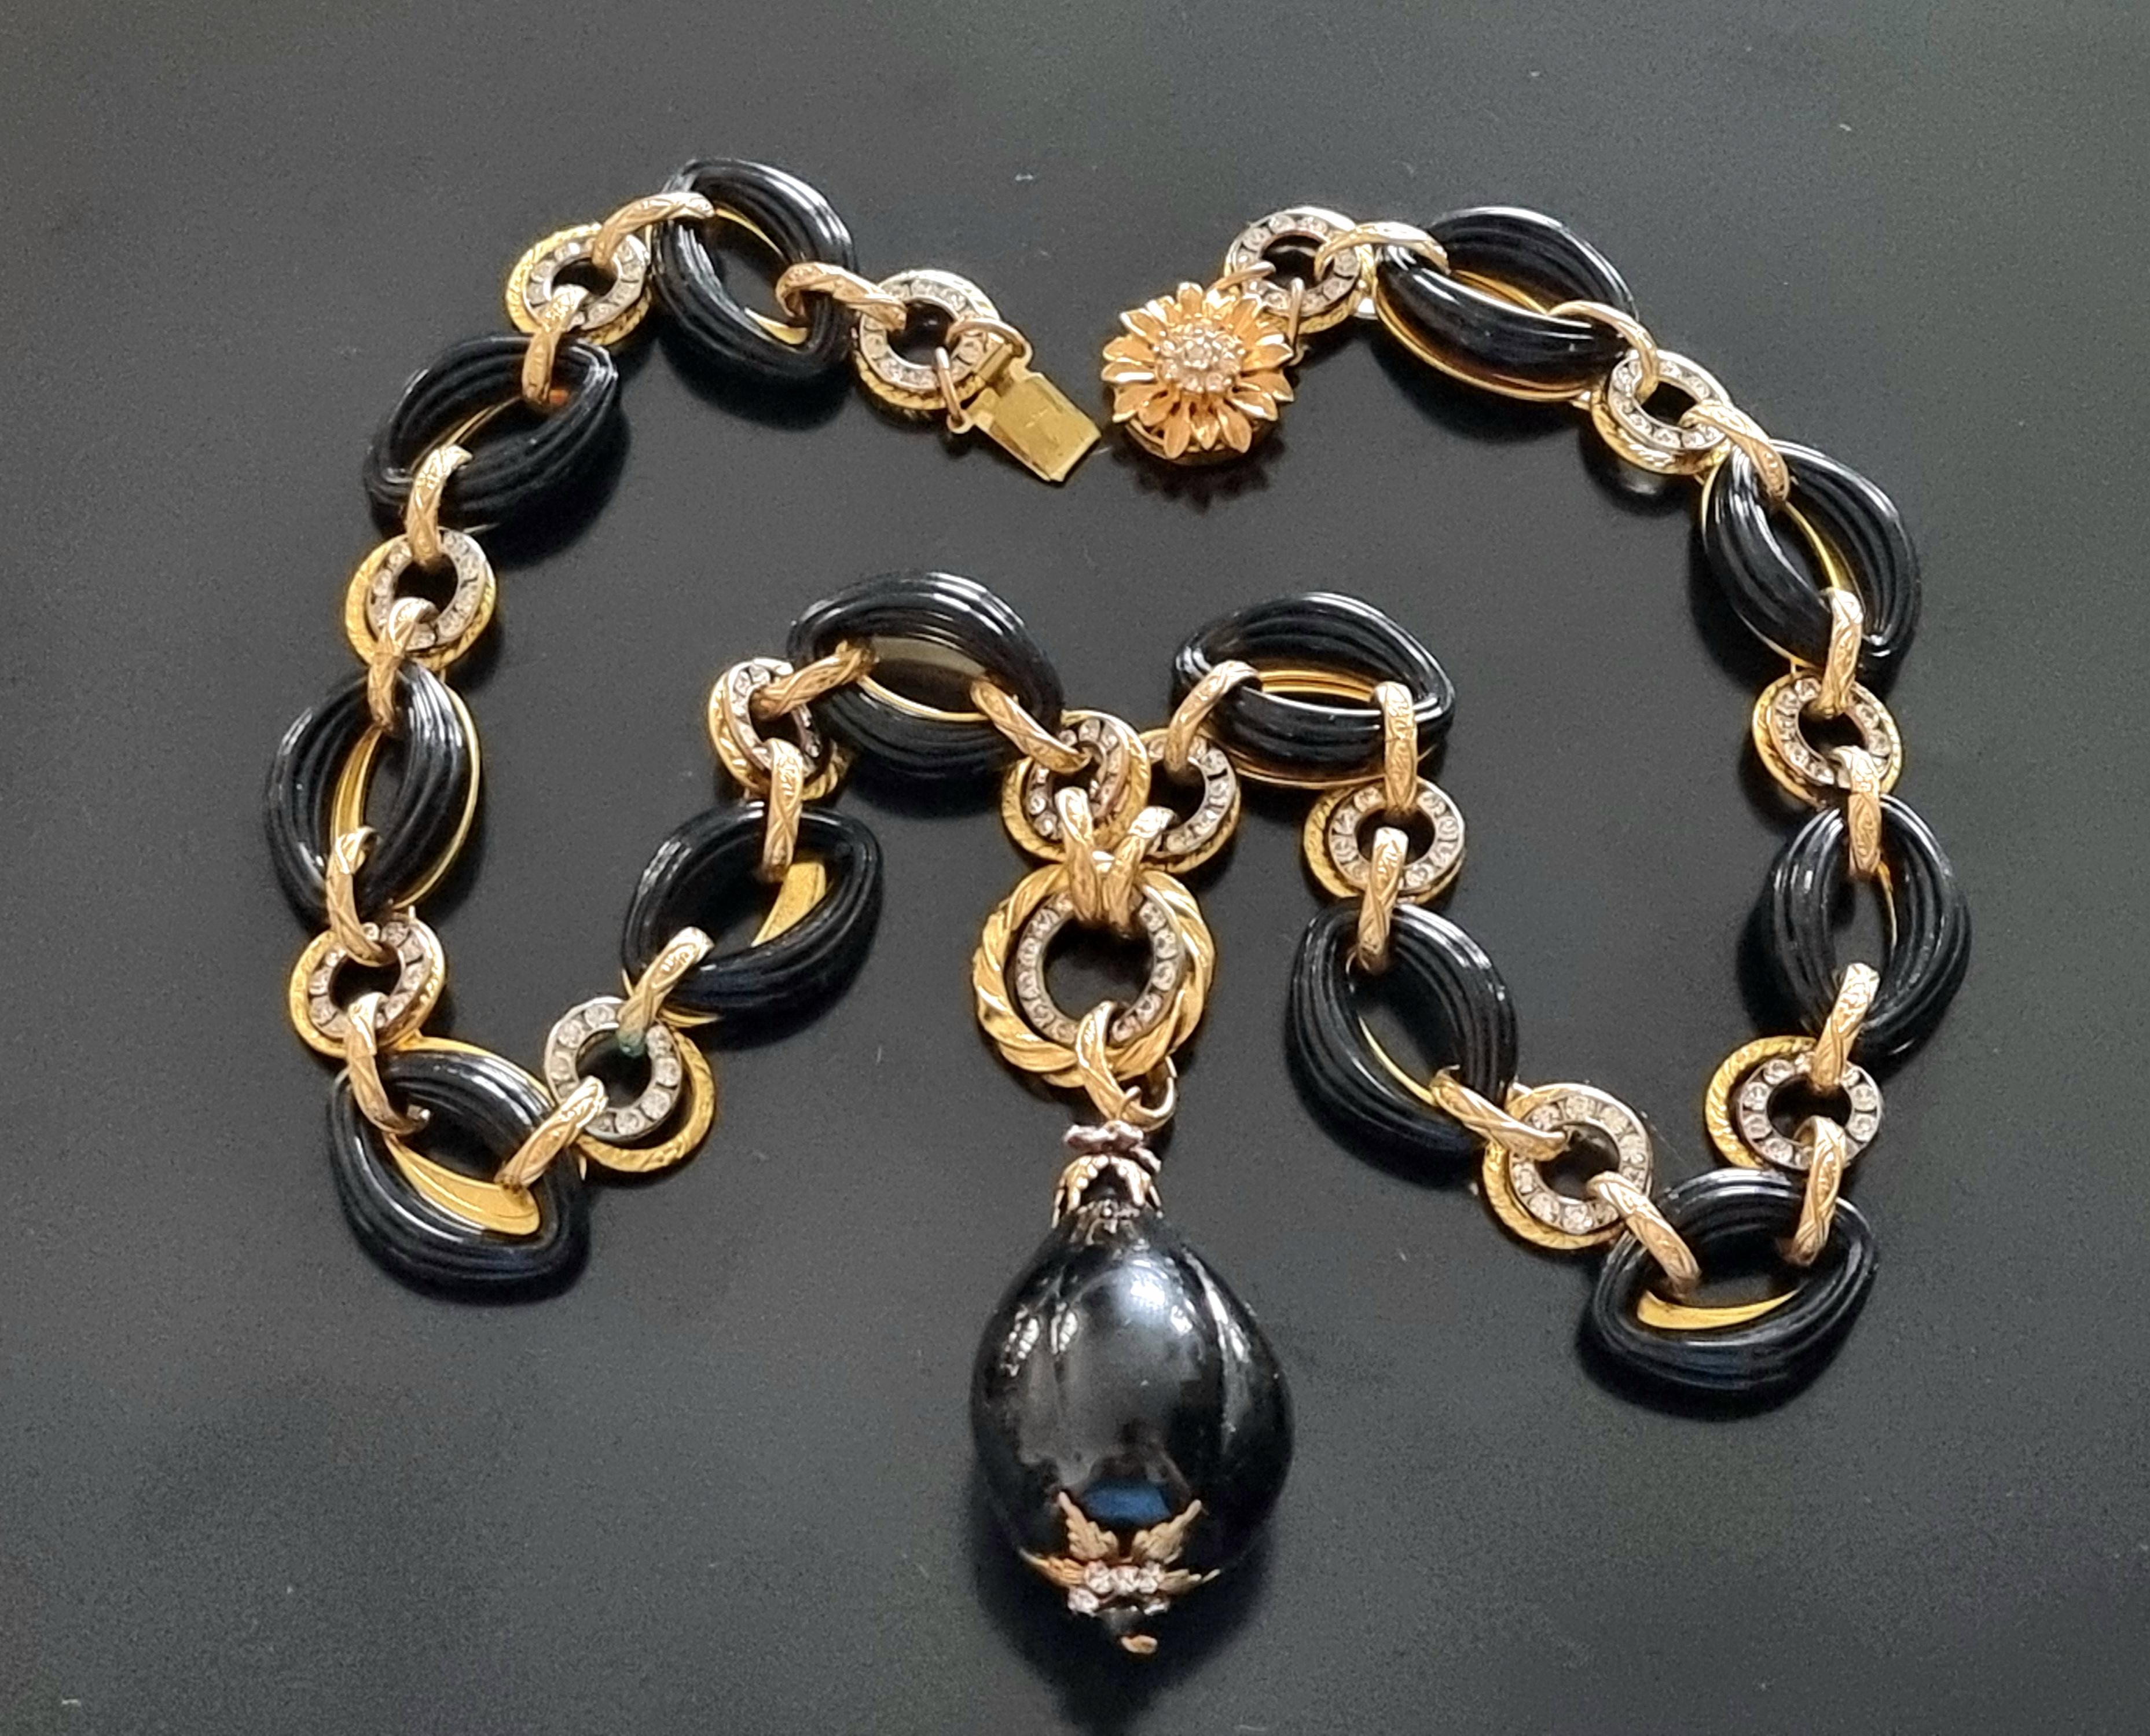 Magnificent NECKLACE with pendant, rhinestones,
vintage from the 60s,
attributed to Chanel,
total length (with clasp) 55 cm, length without clasp 52.5 cm,
pendant alone 5 cm, necklace weight 105 g,
very good state.

FR:
Magnifique COLLIER avec